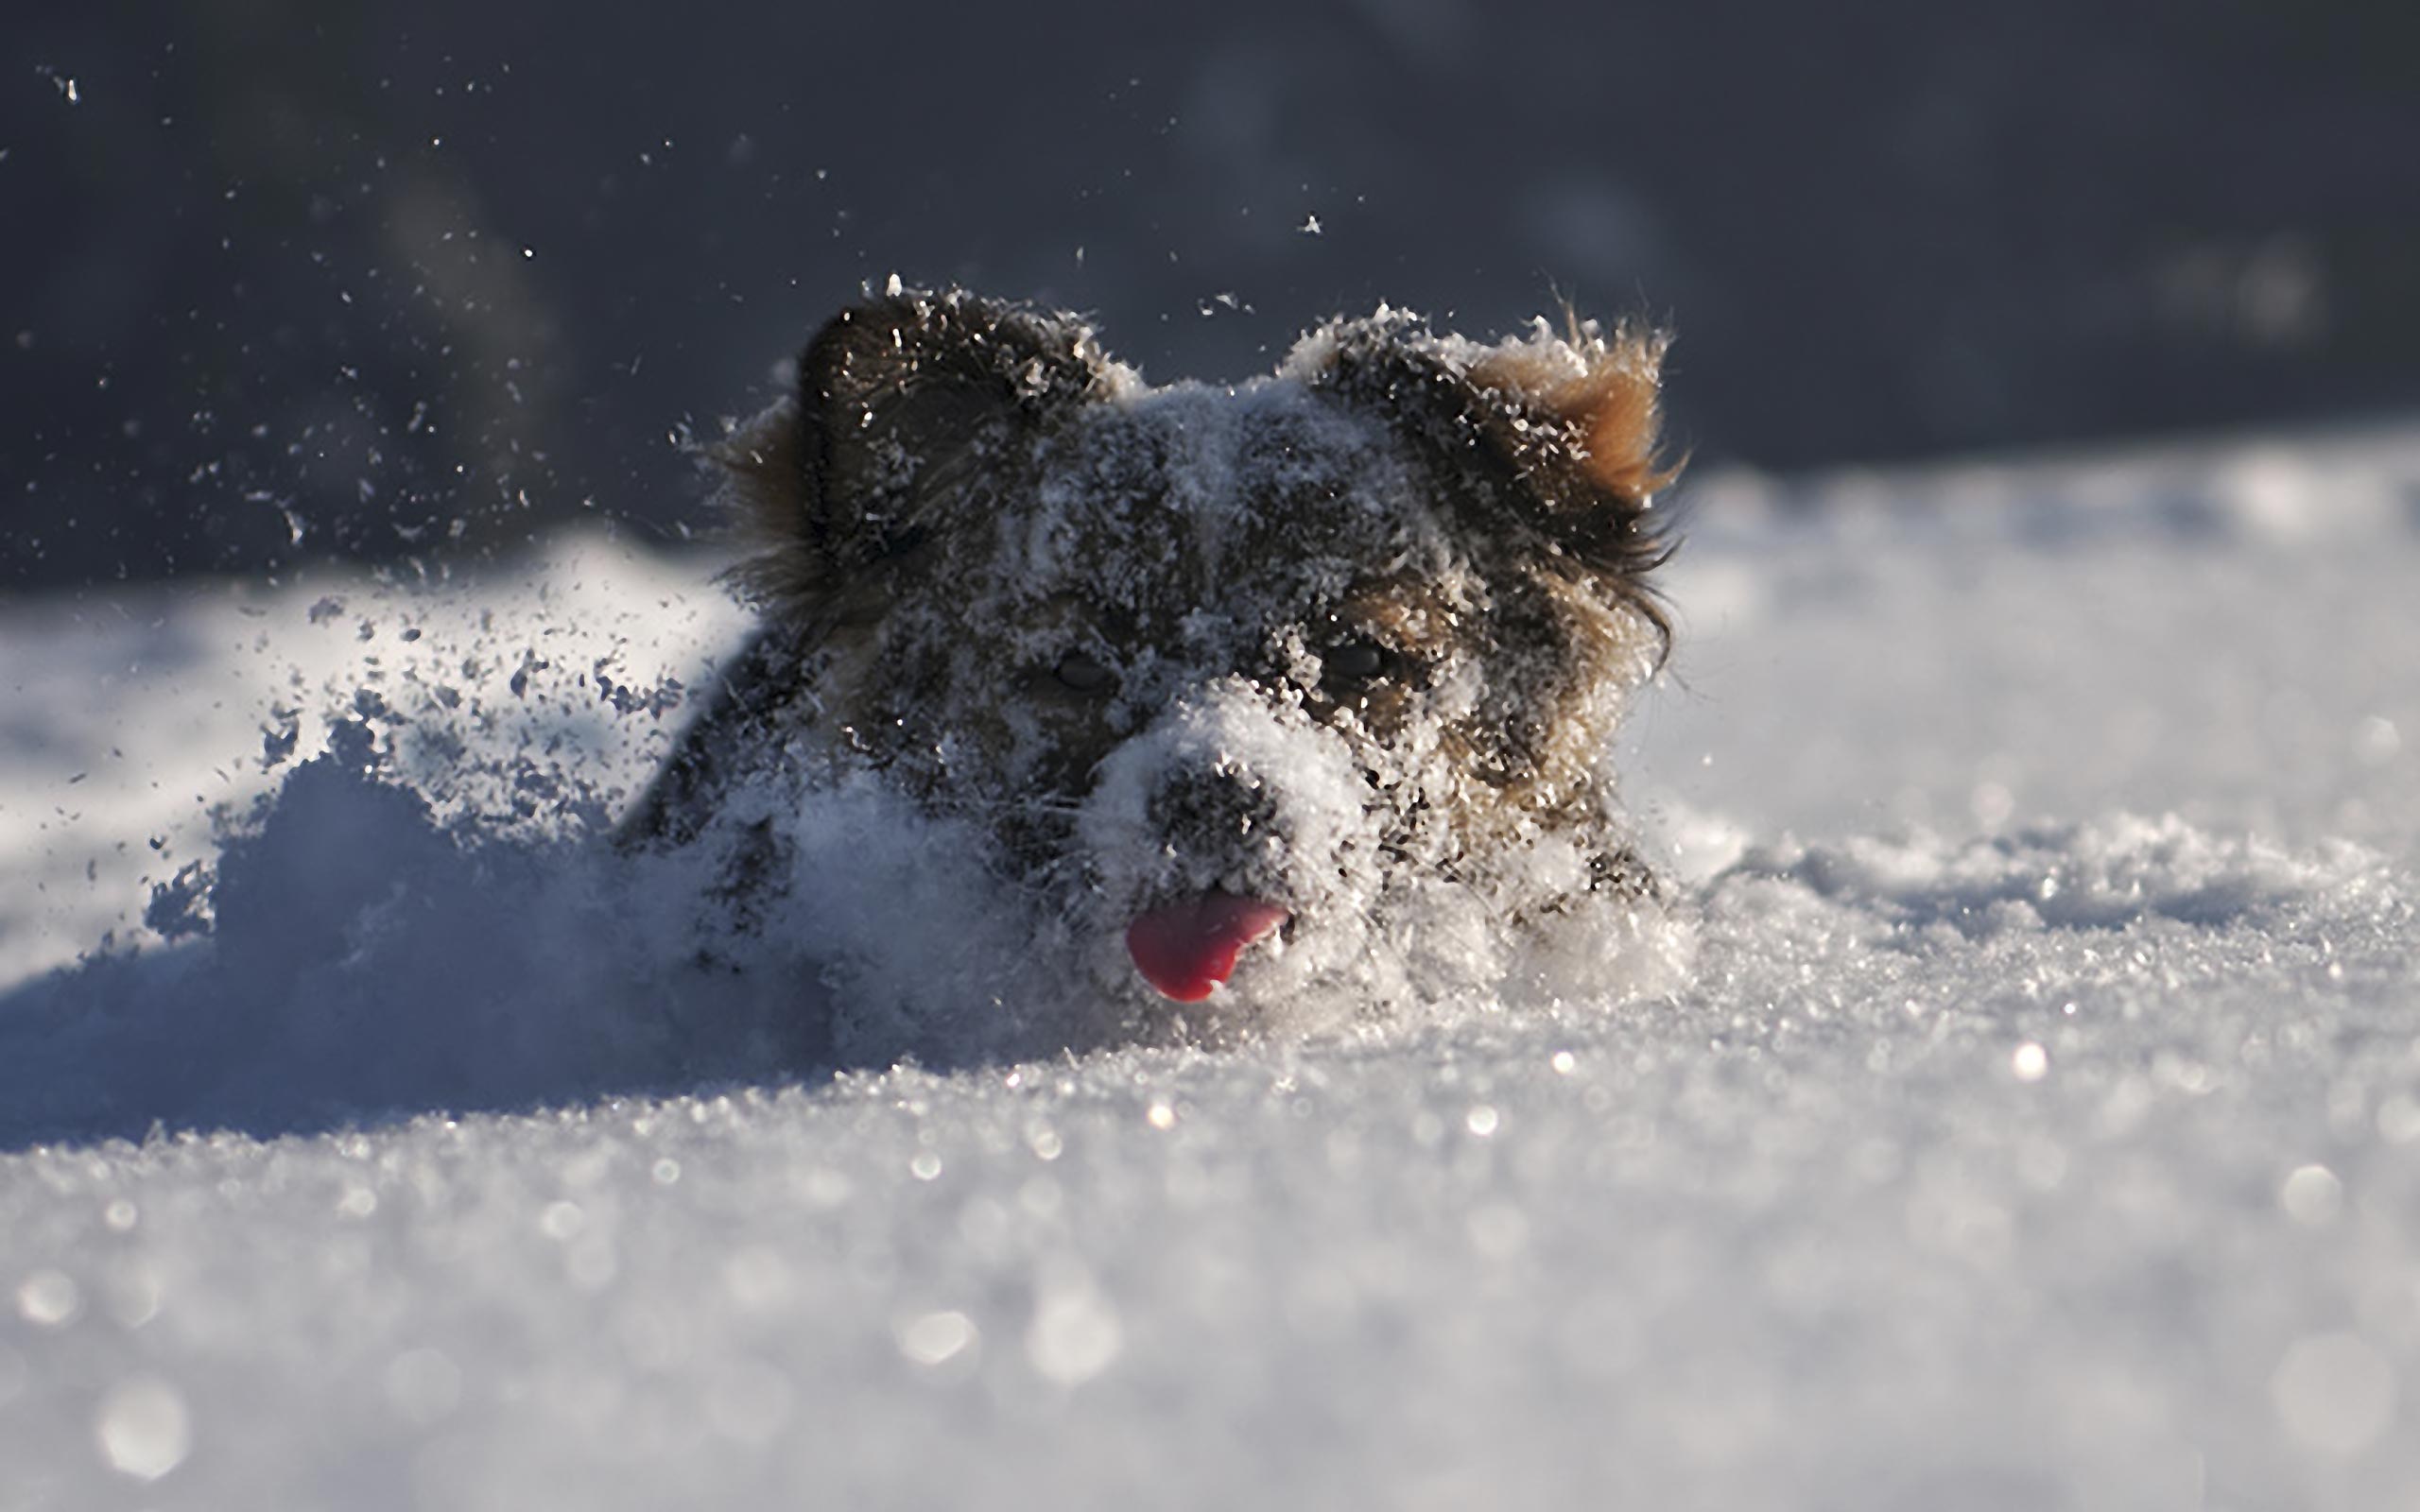 Desktop backgrounds · Animal Life · Dogs | Puppy dogs Dog in snow